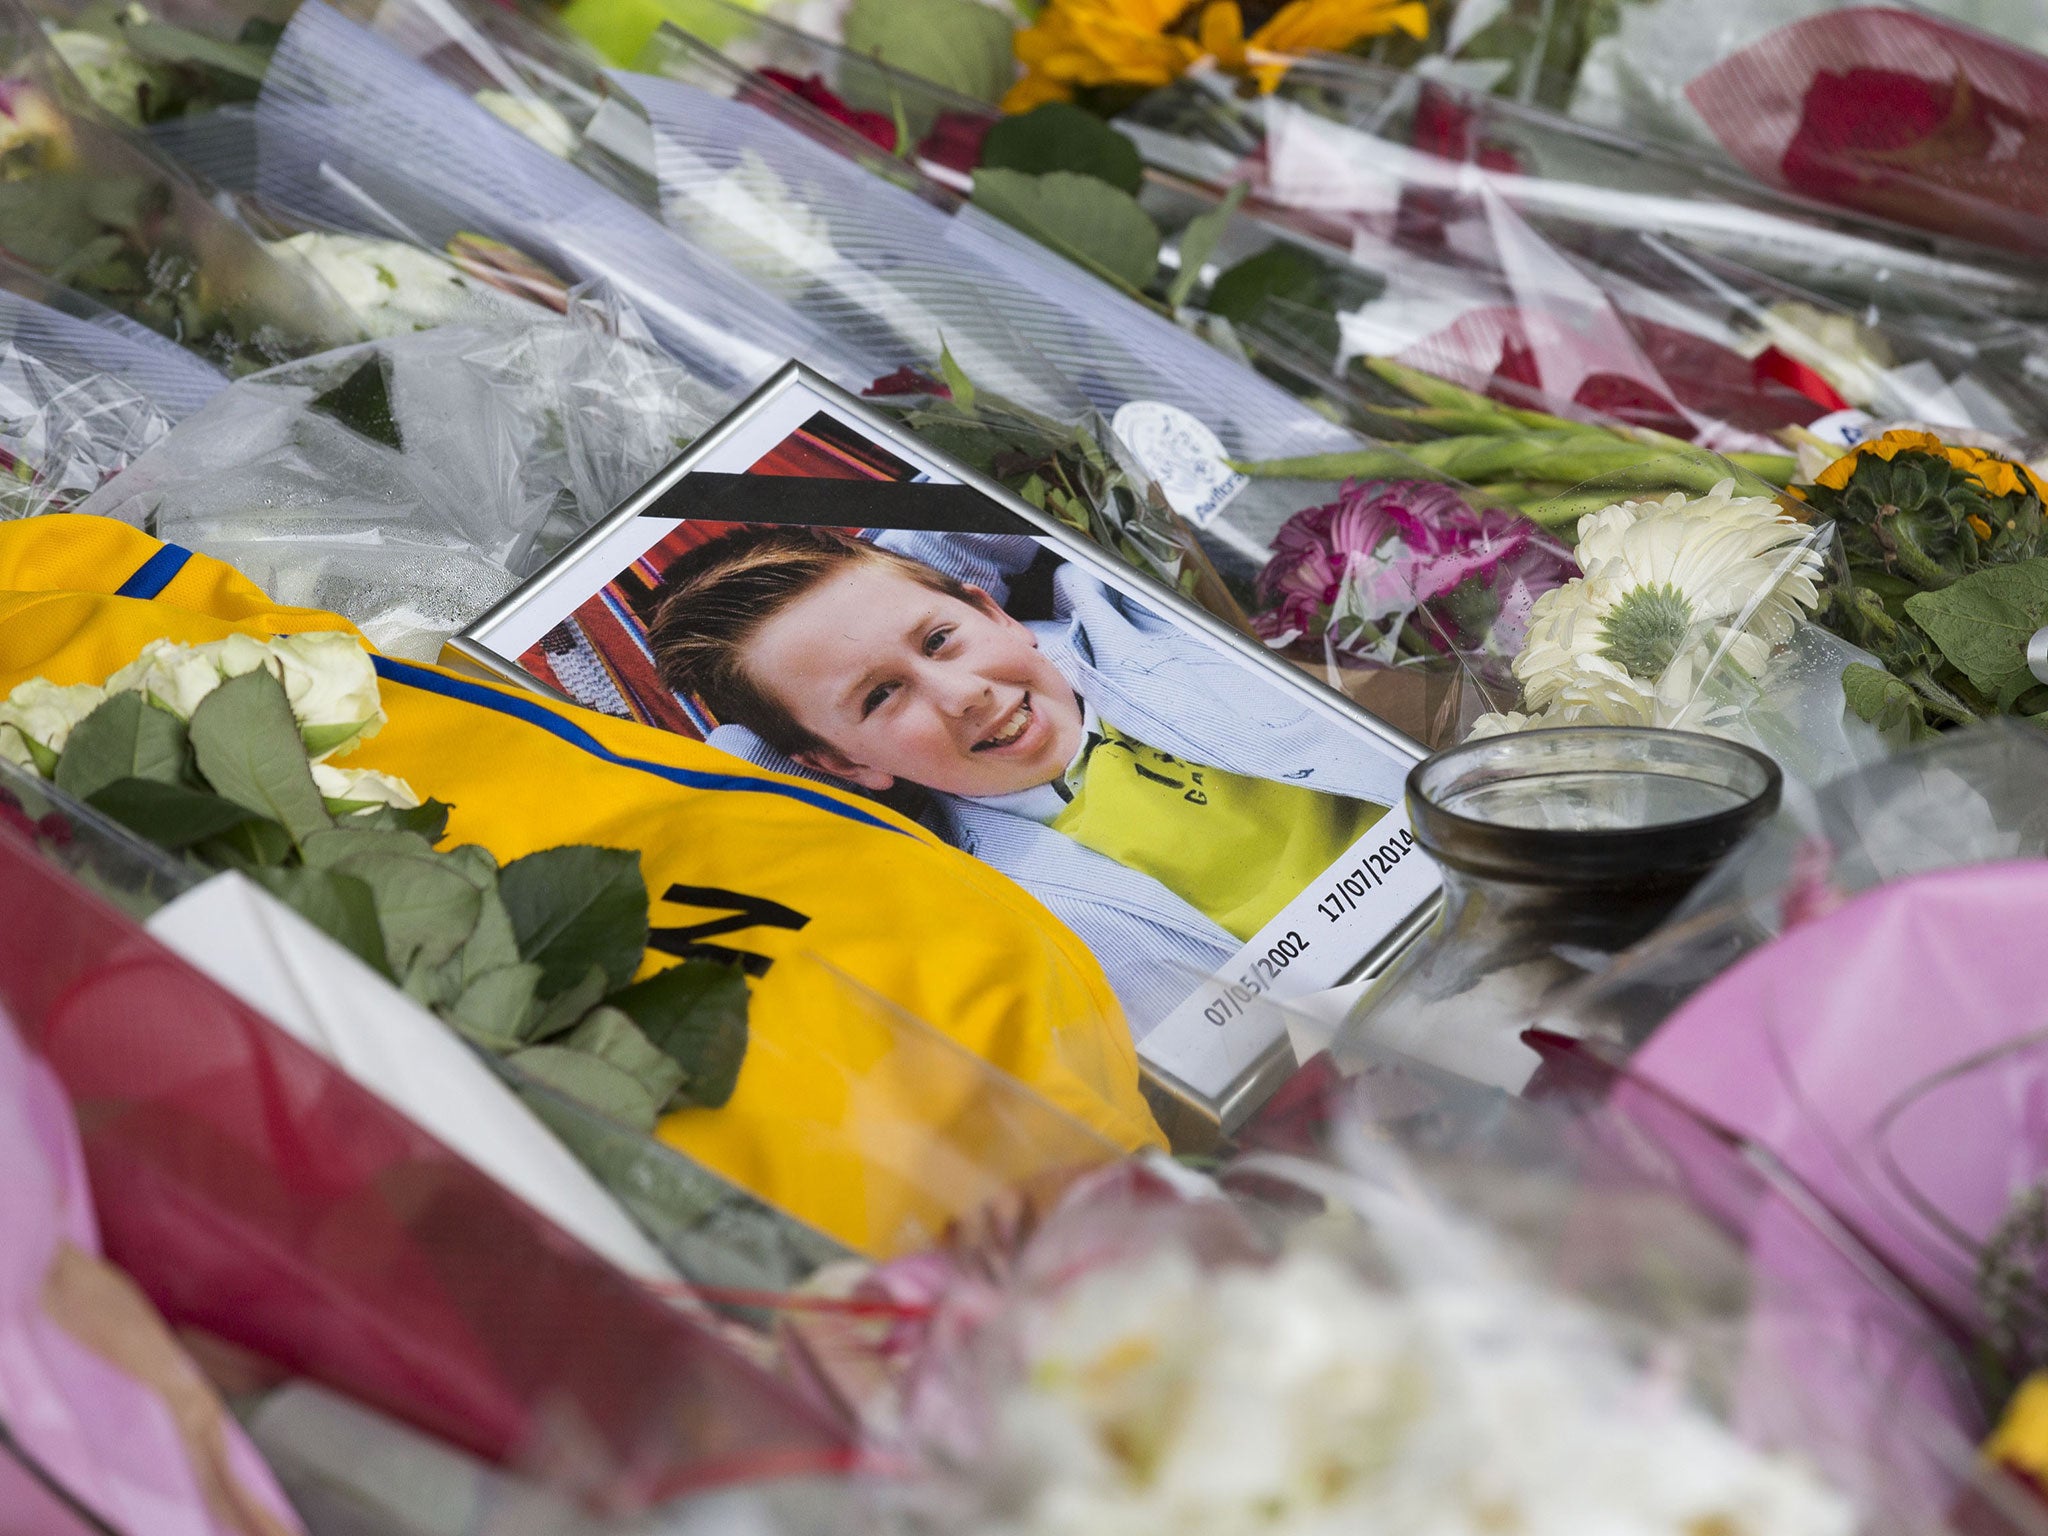 A portrait of a young victim lies at a makeshift memorial for the passengers aboard doomed flight Malaysia Airlines MH17 at Schiphol Airport in Amsterdam